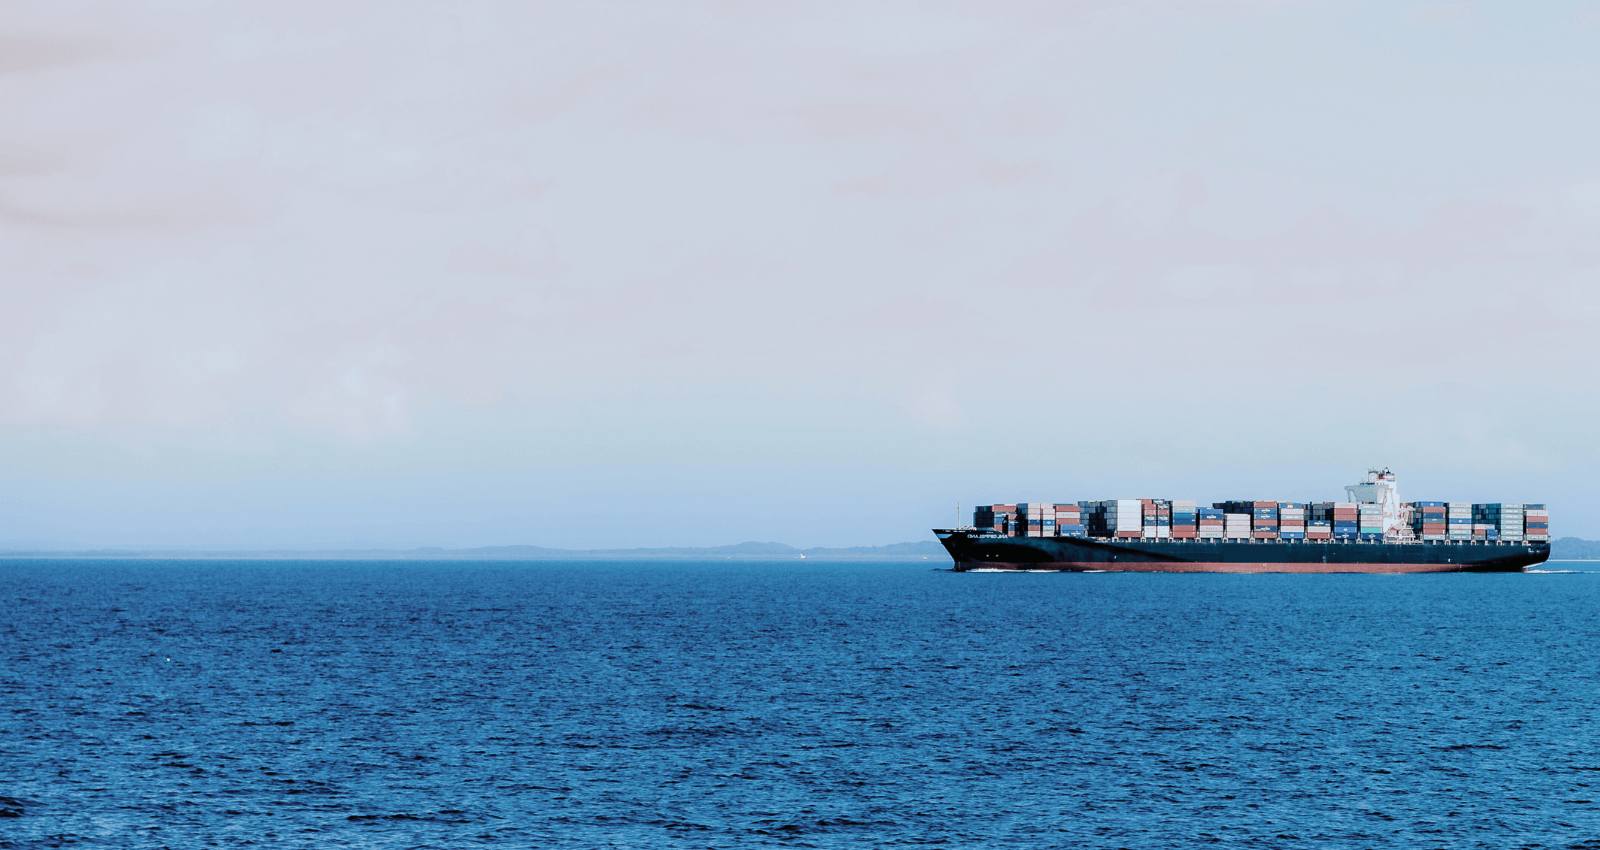 A shipping vessel on the ocean